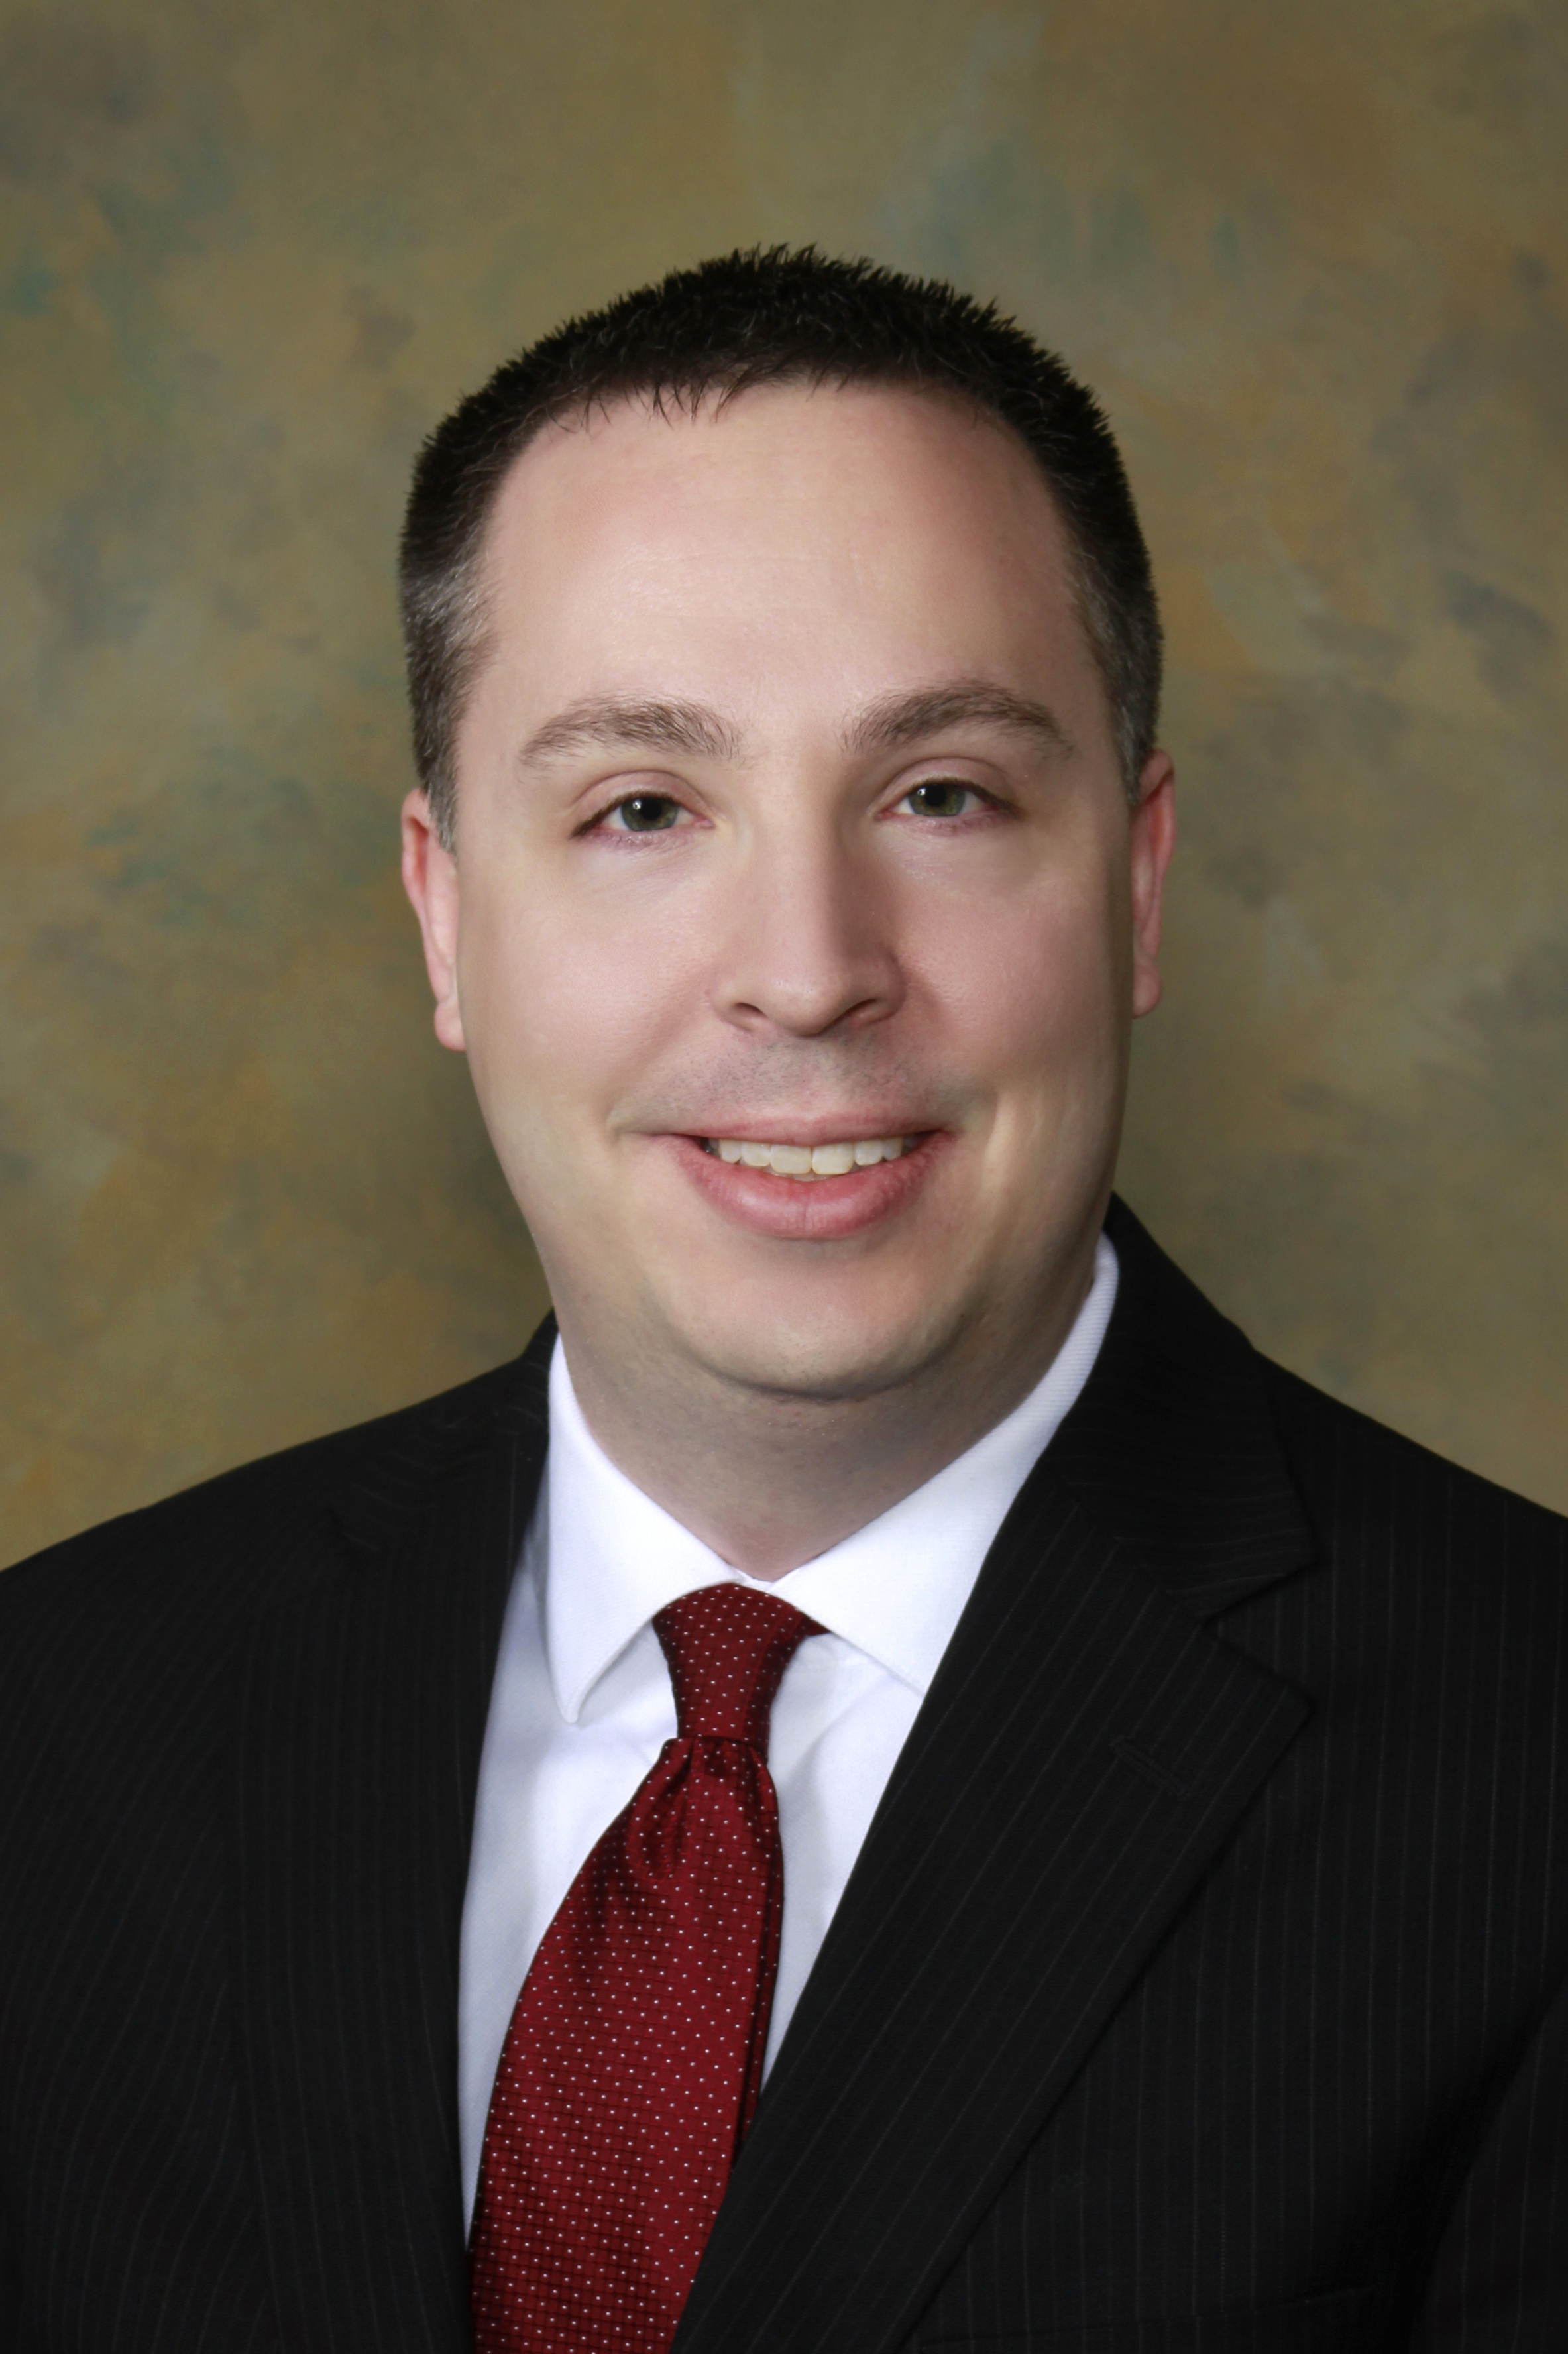 DUI Attorney Andrew Hoverman - Baltimore County, MD - DUIAttorney.com